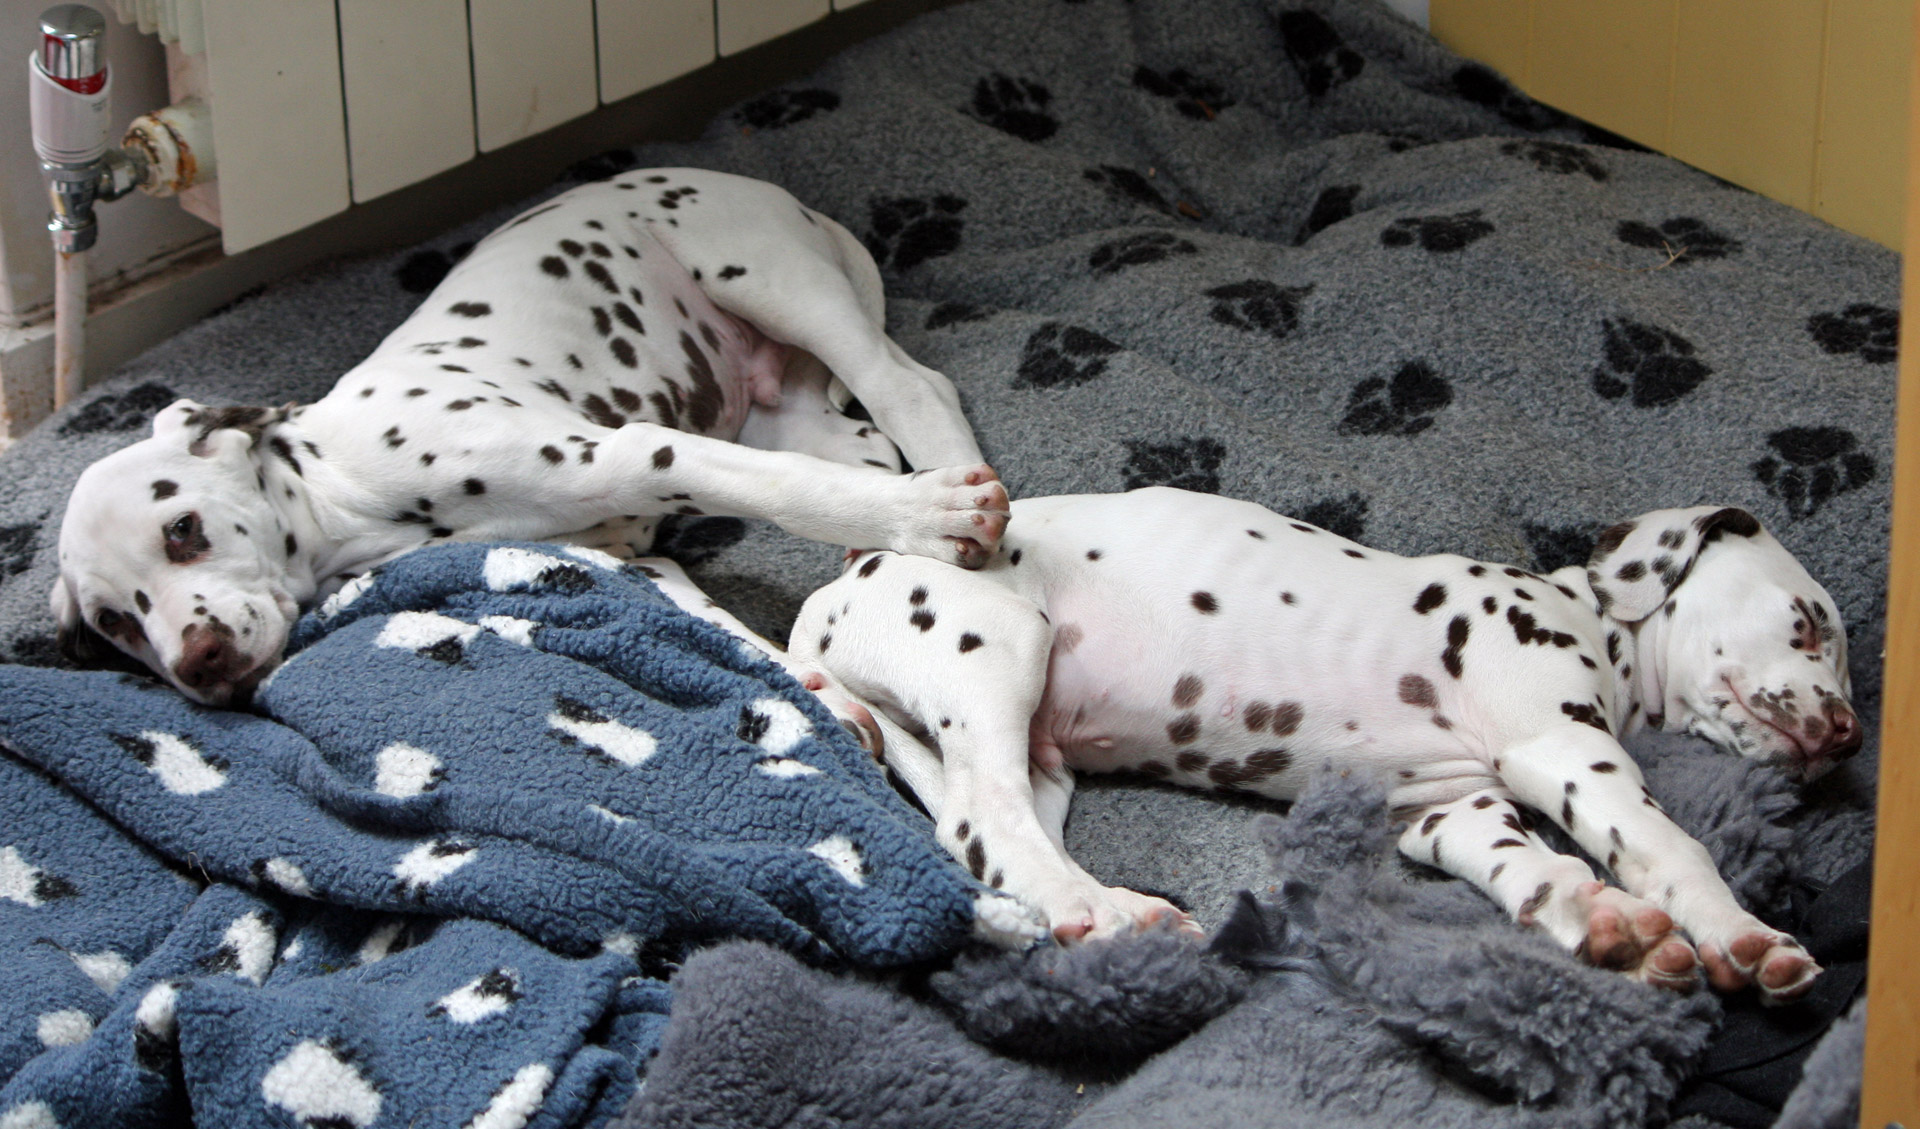 Two dalmatian puppy dogs sleeping